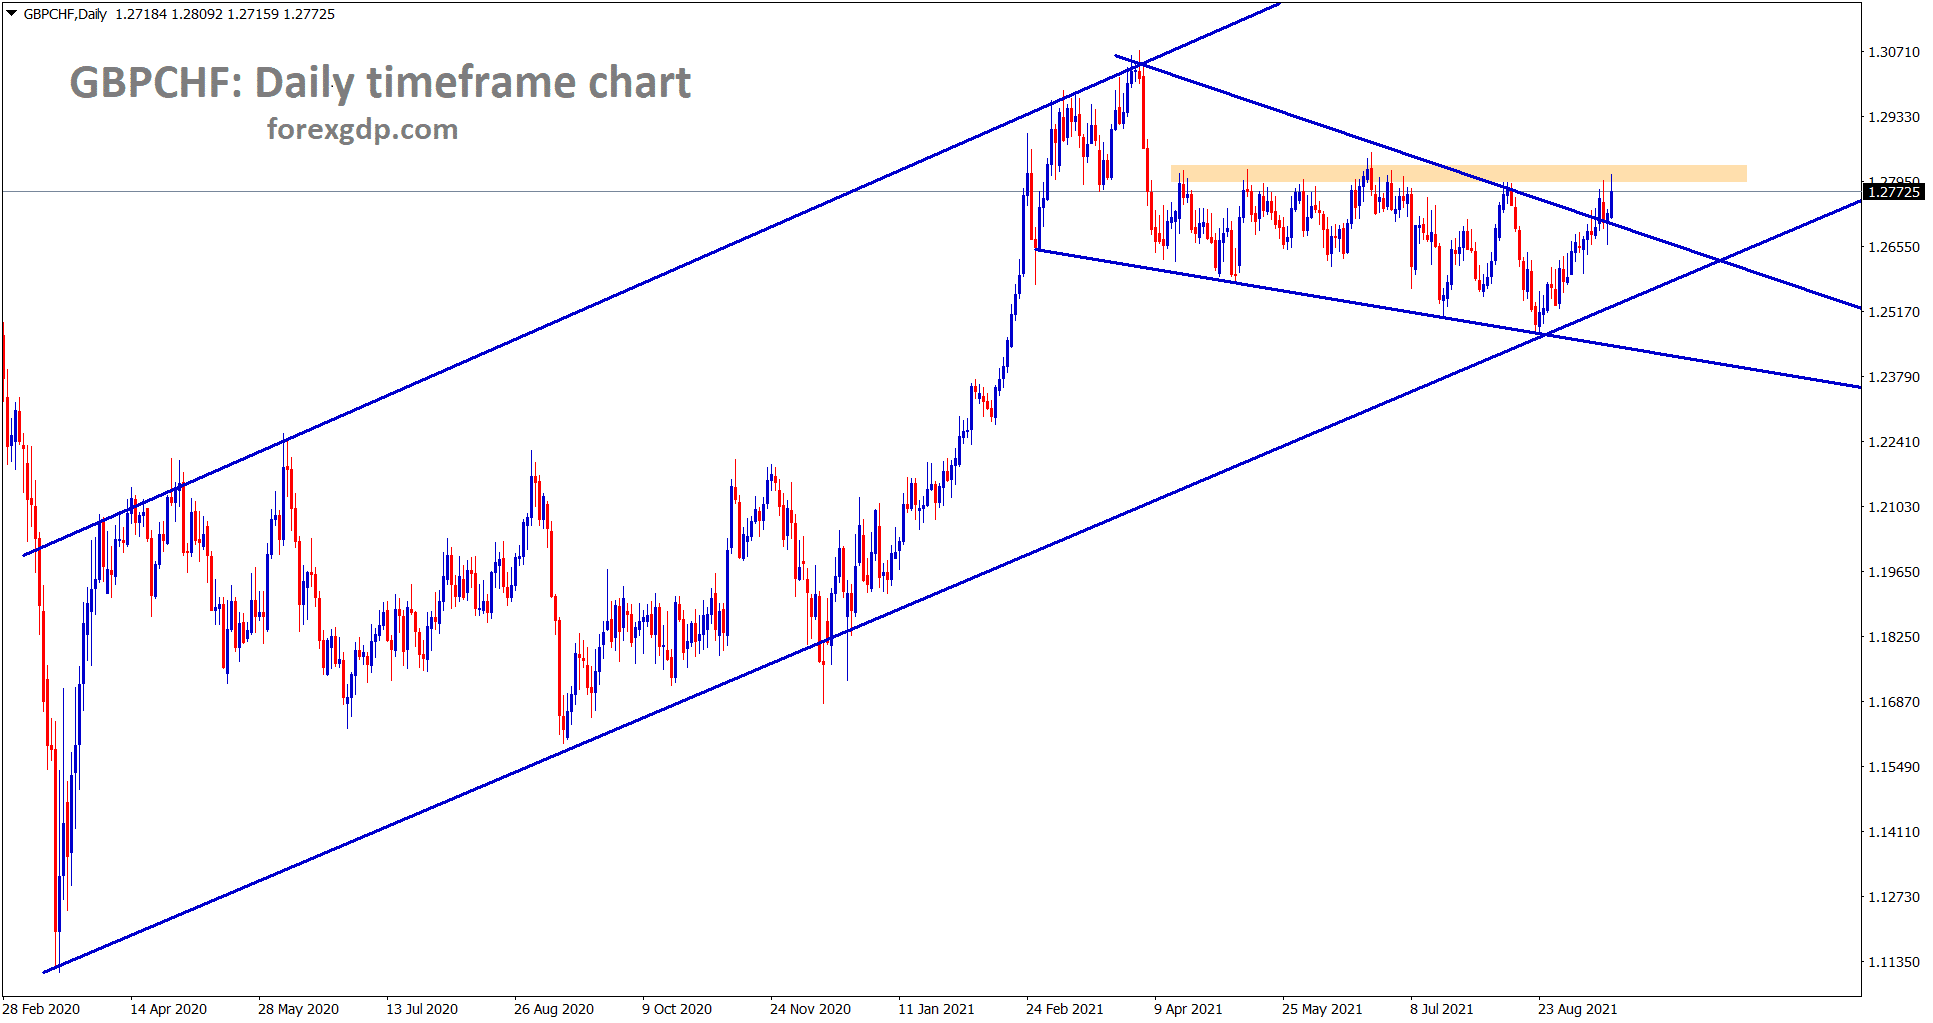 GBPCHF again hits the horizontal resistance after retesting the broken falling wedge